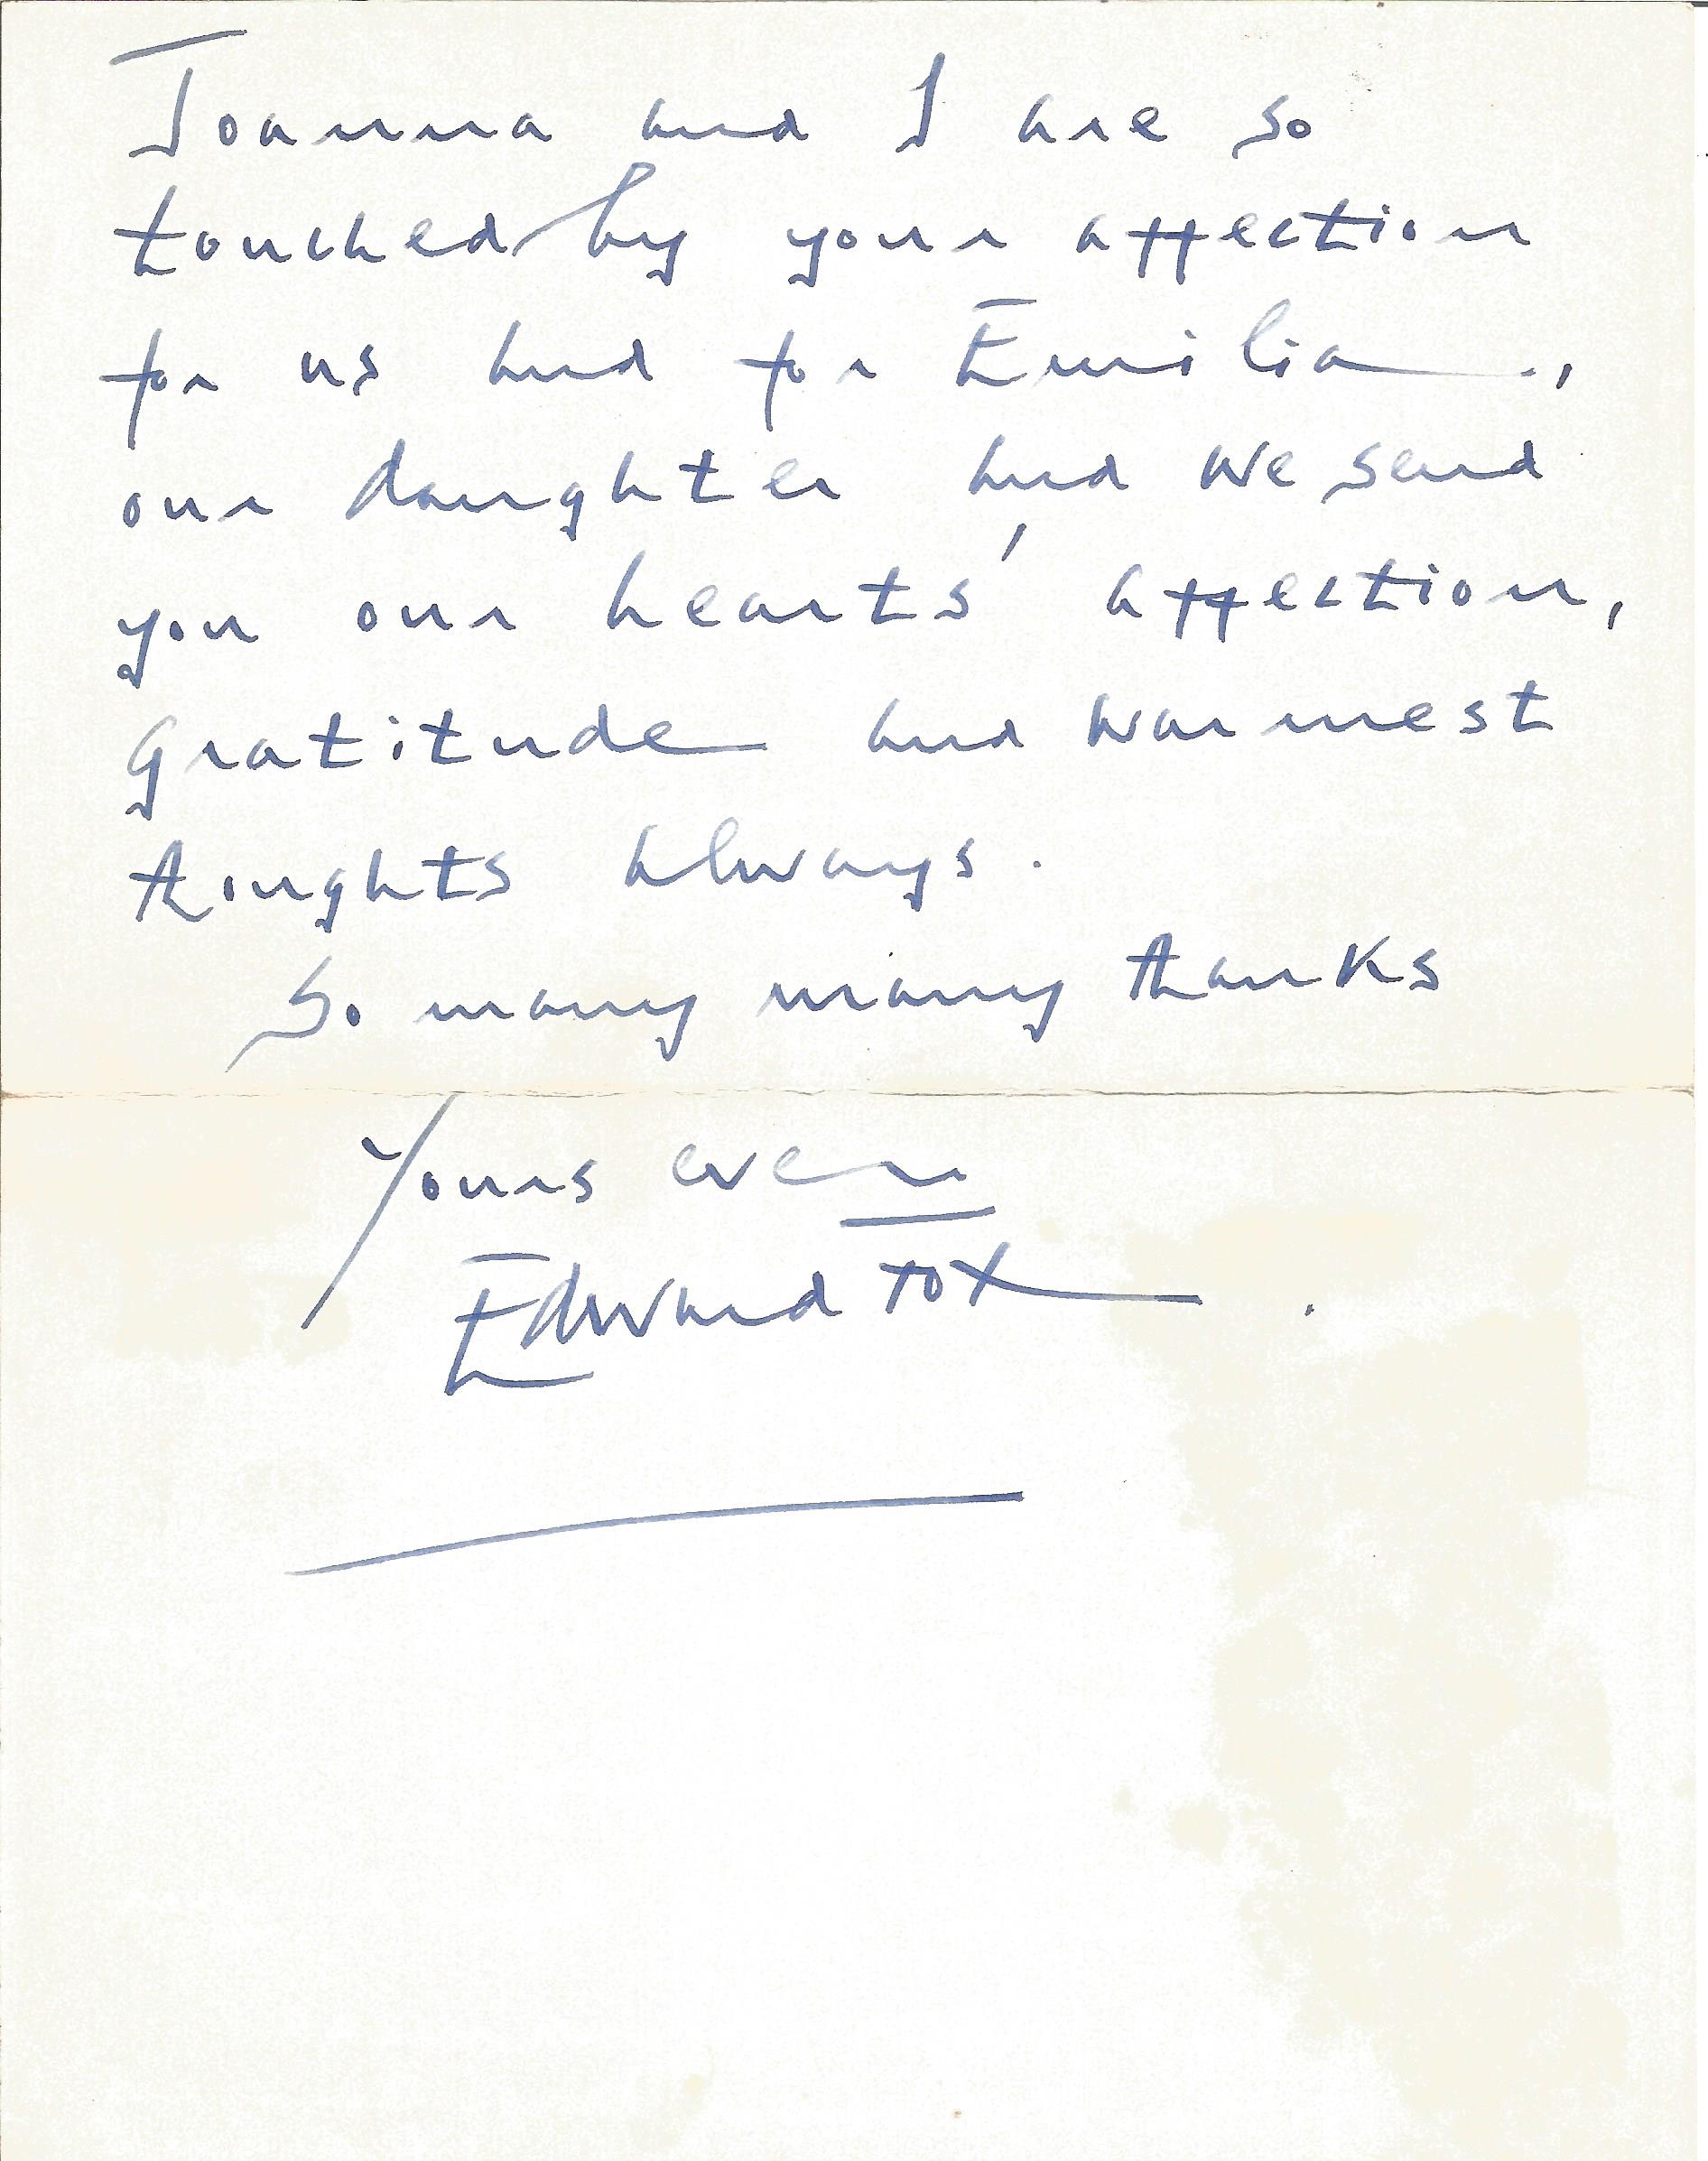 Edward Fox ALS dated 7/11/83 thanking the recipient for an article she had translated for him. - Image 2 of 2